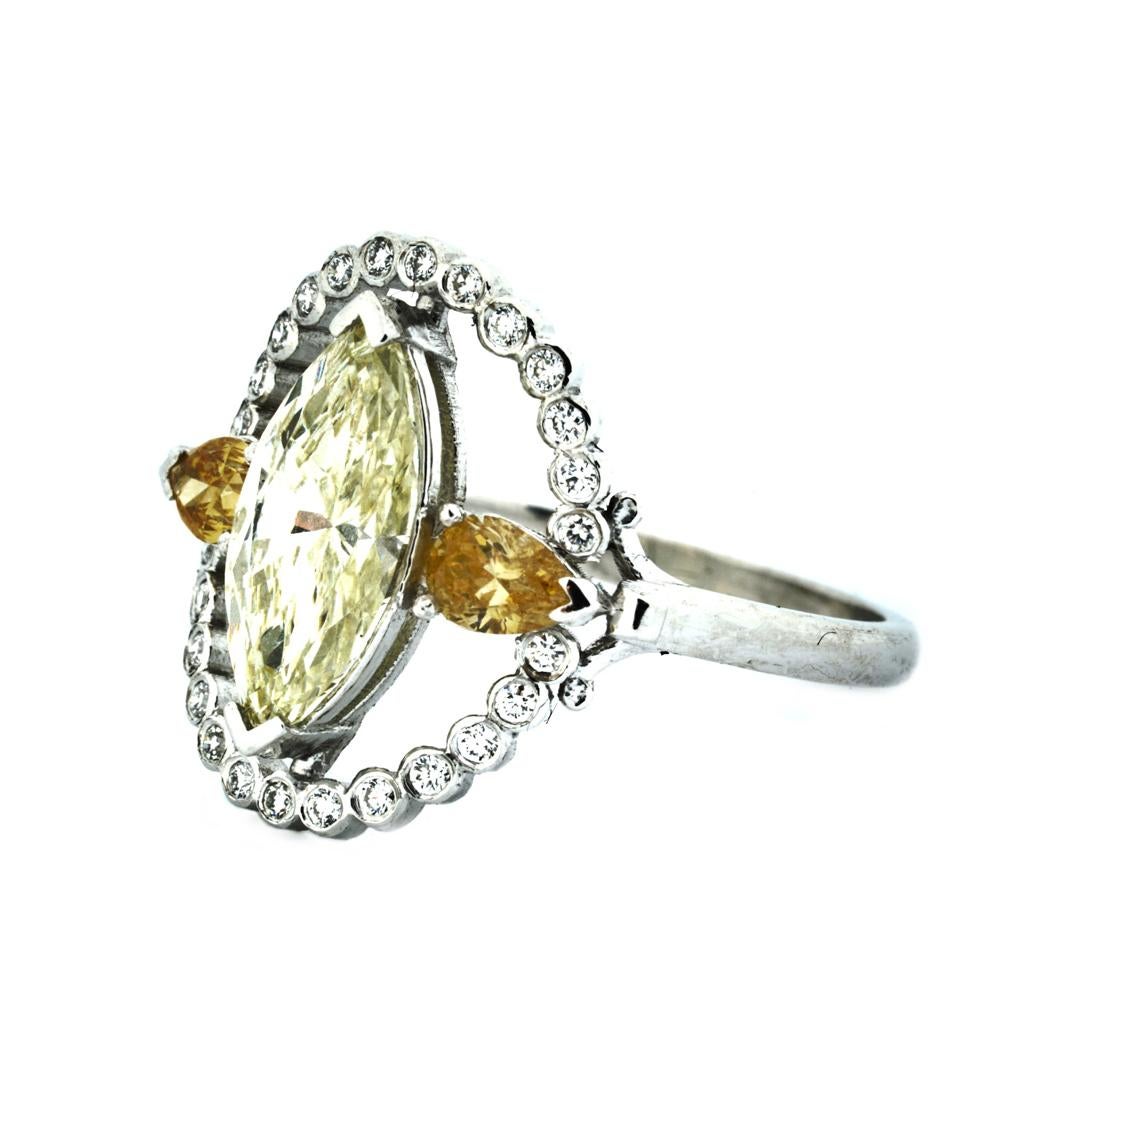 Handcrafted in 18kt white gold, this ring features a central marquise cut diamond, flanked by 2 pear cut diamonds within a halo of 26 round brilliant cut diamonds.

The central marquise diamond in a shade of beautiful pale green/yellow is SI in